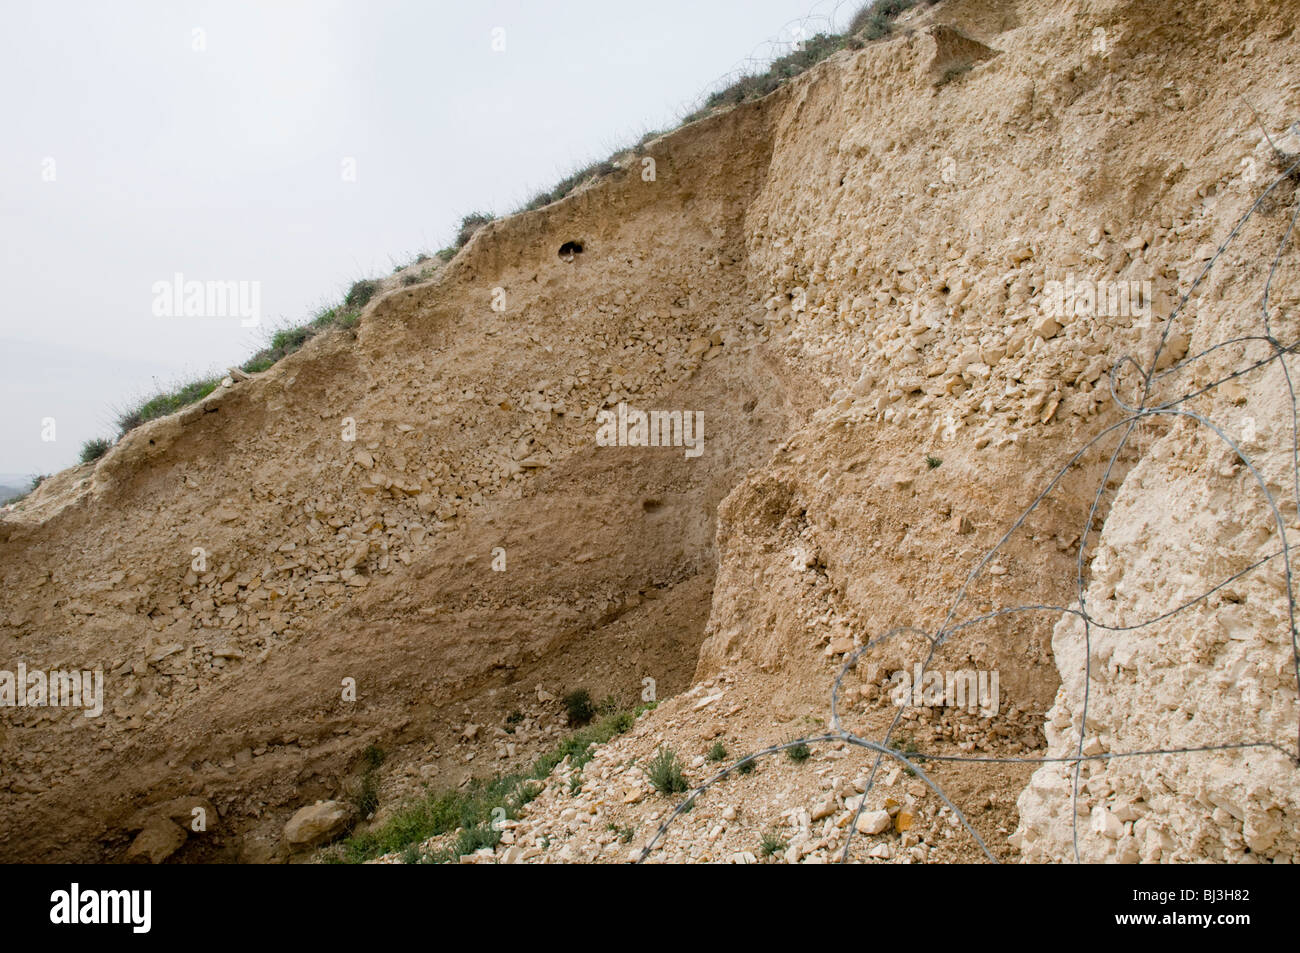 Israel, West Bank, Judaea, Herodion a castle fortress built by King Herod 20 B.C.E. an excavation in the man-made hill Stock Photo